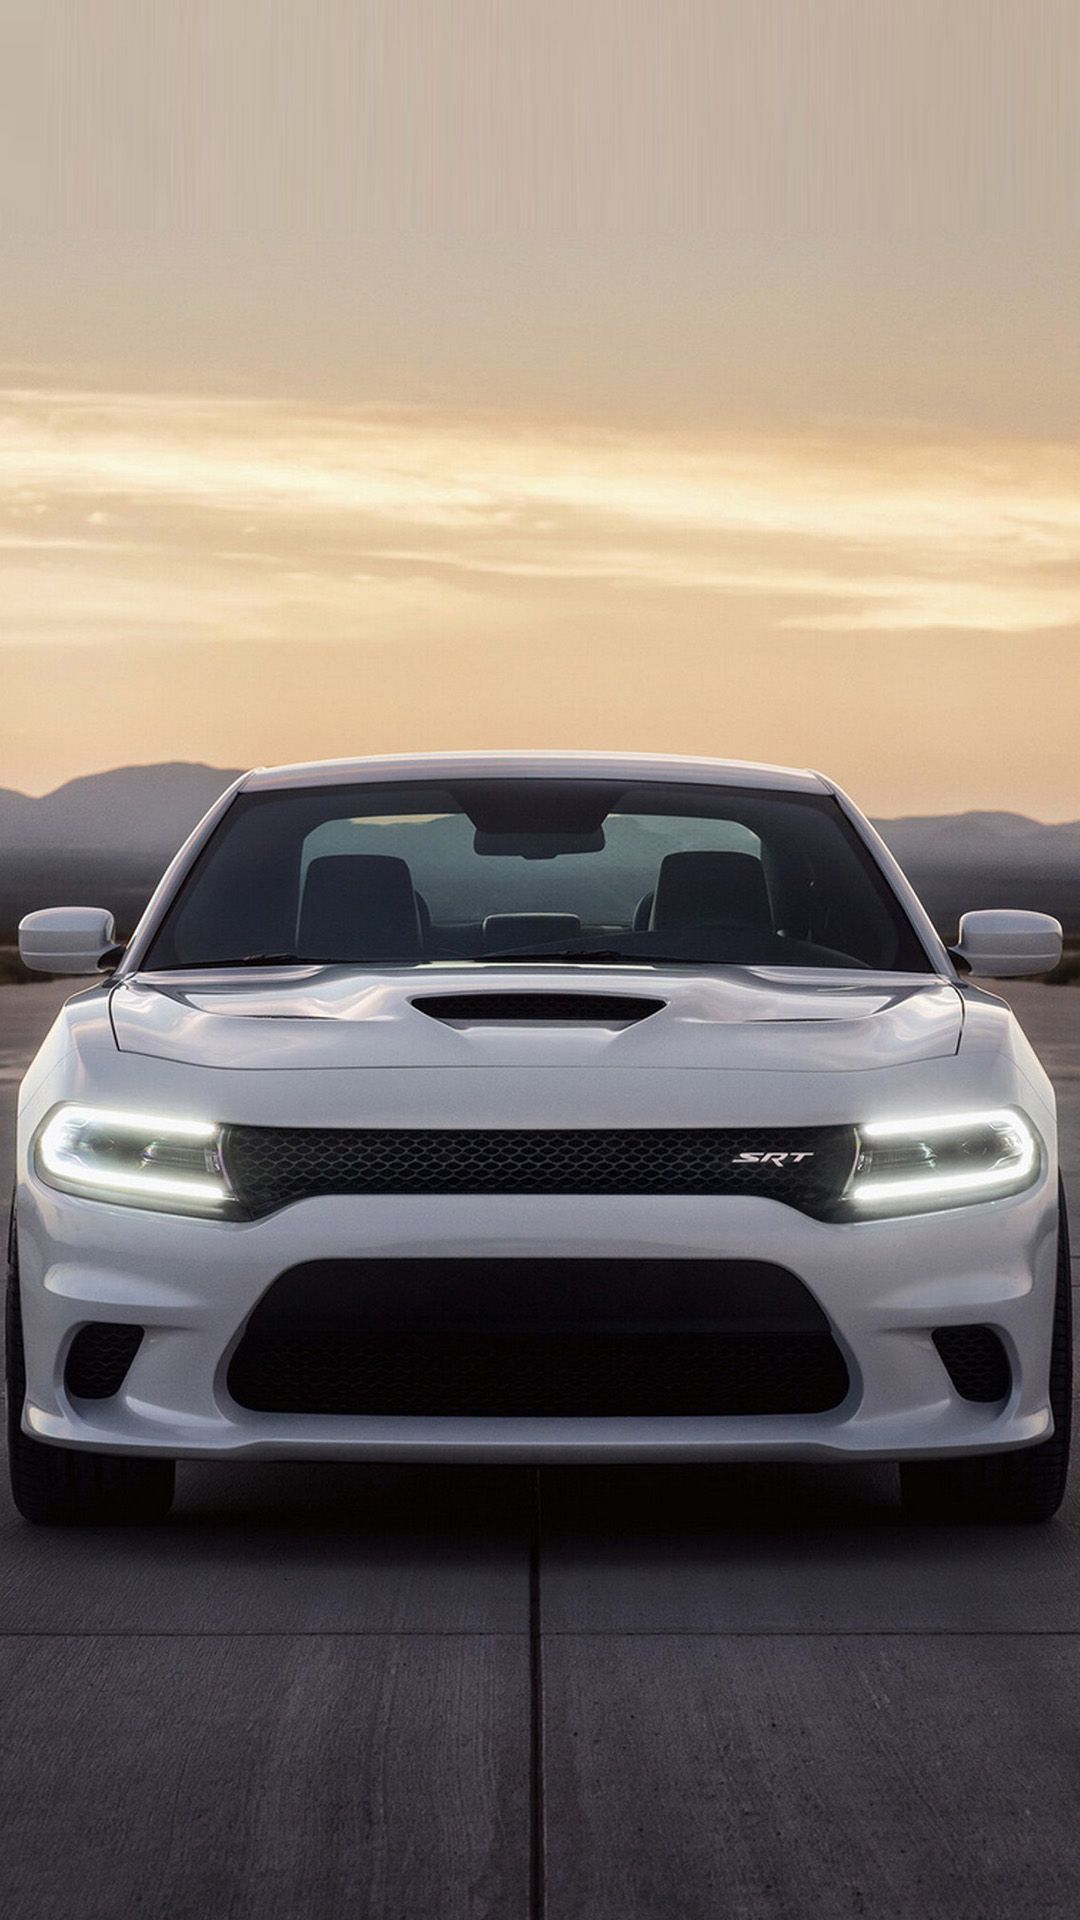 Charger Iphone Wallpapers